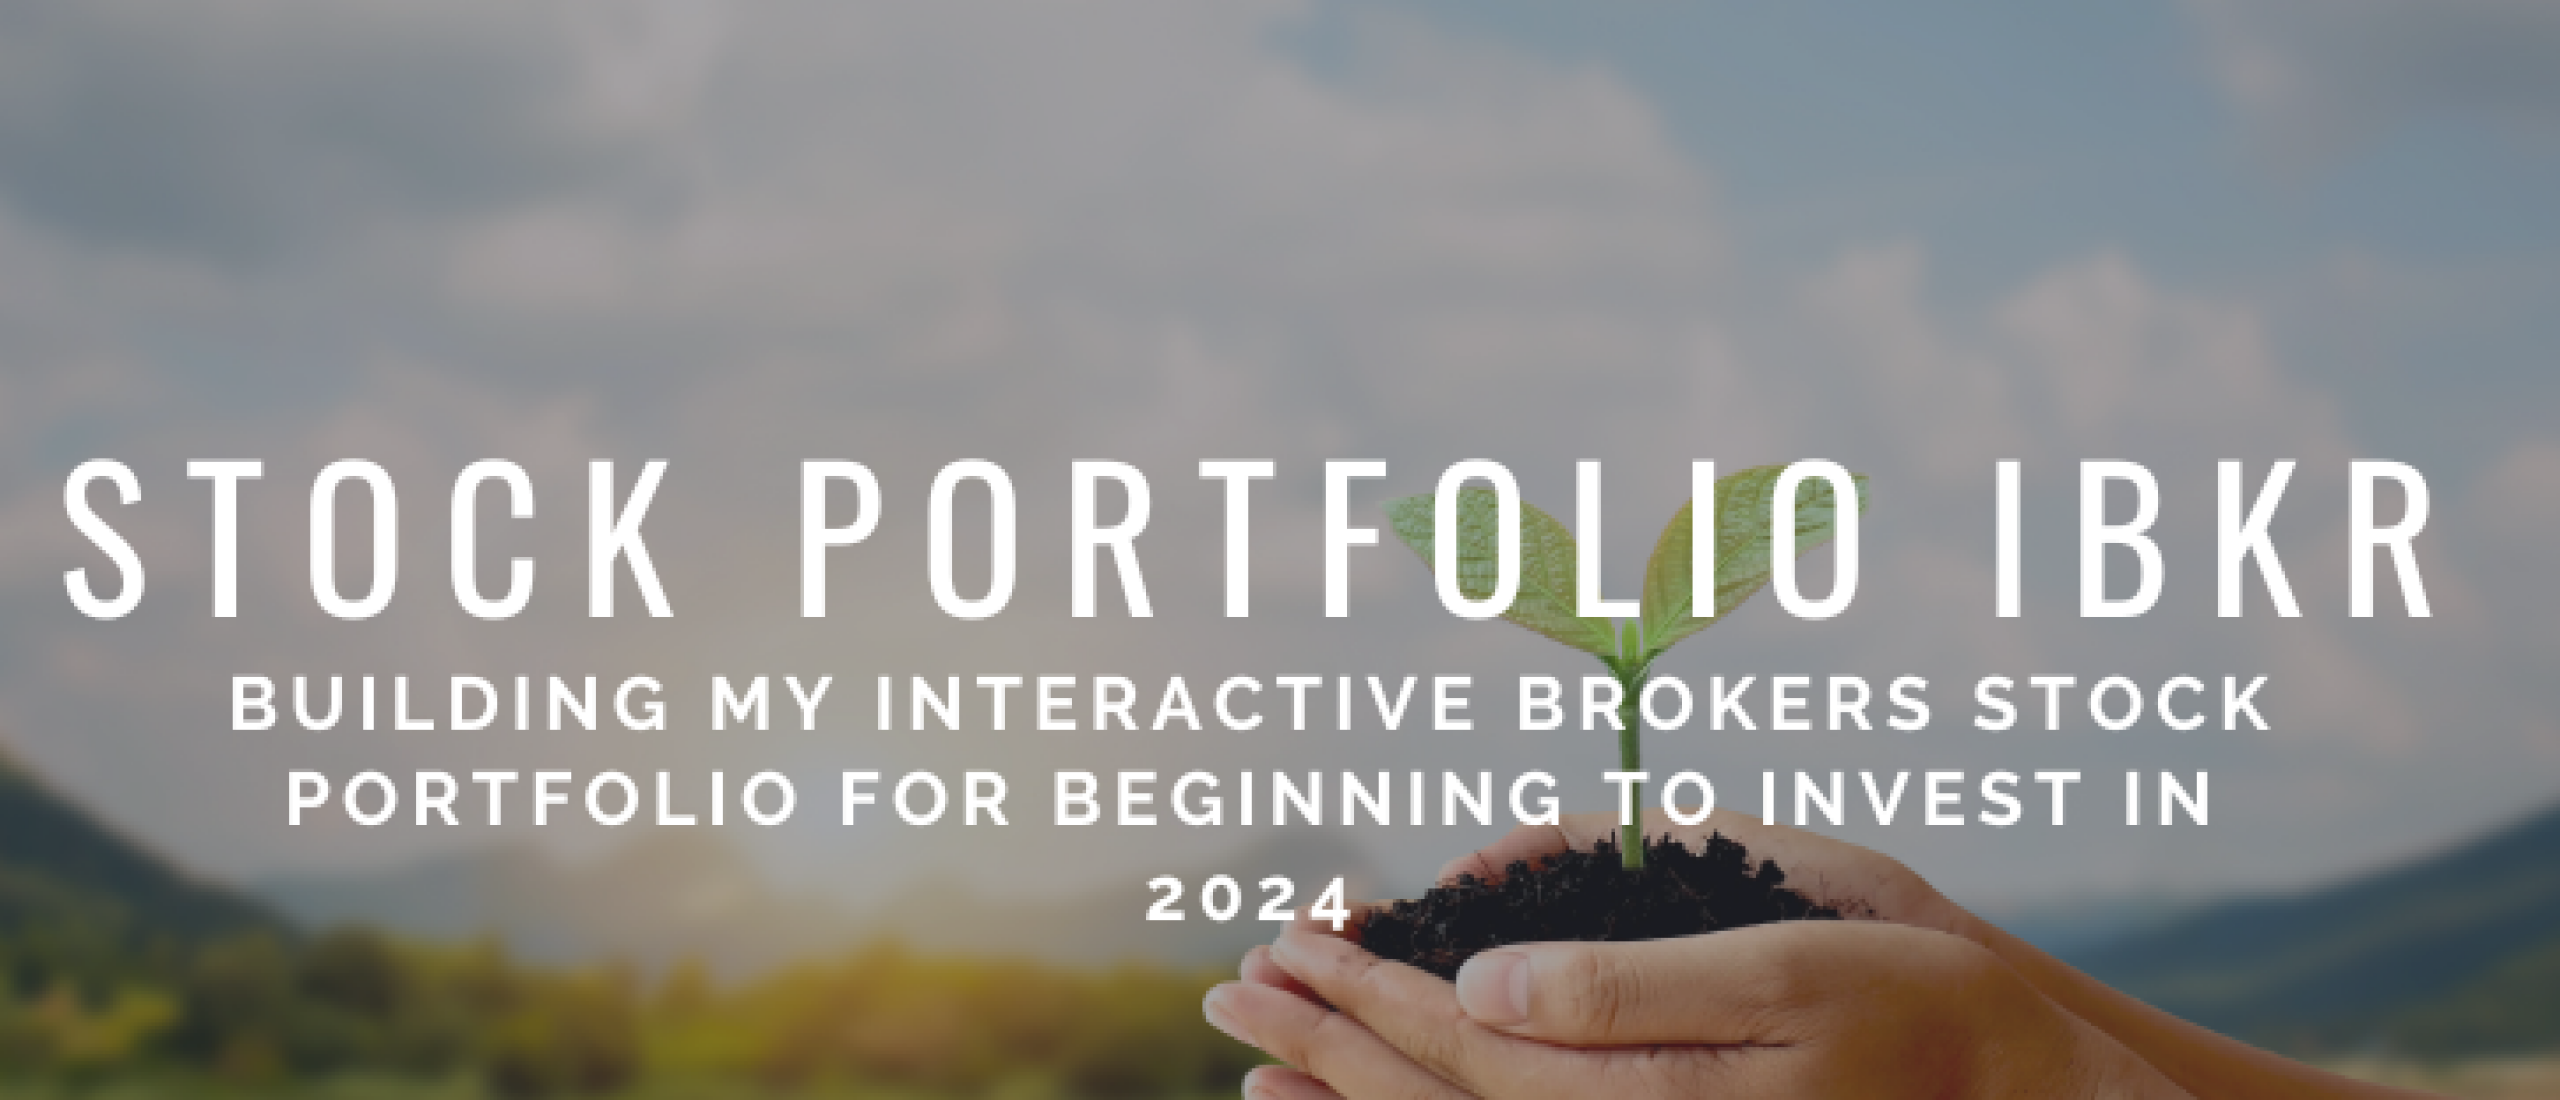 Building my Interactive Brokers Stock Portfolio for Beginning to Invest in 2024